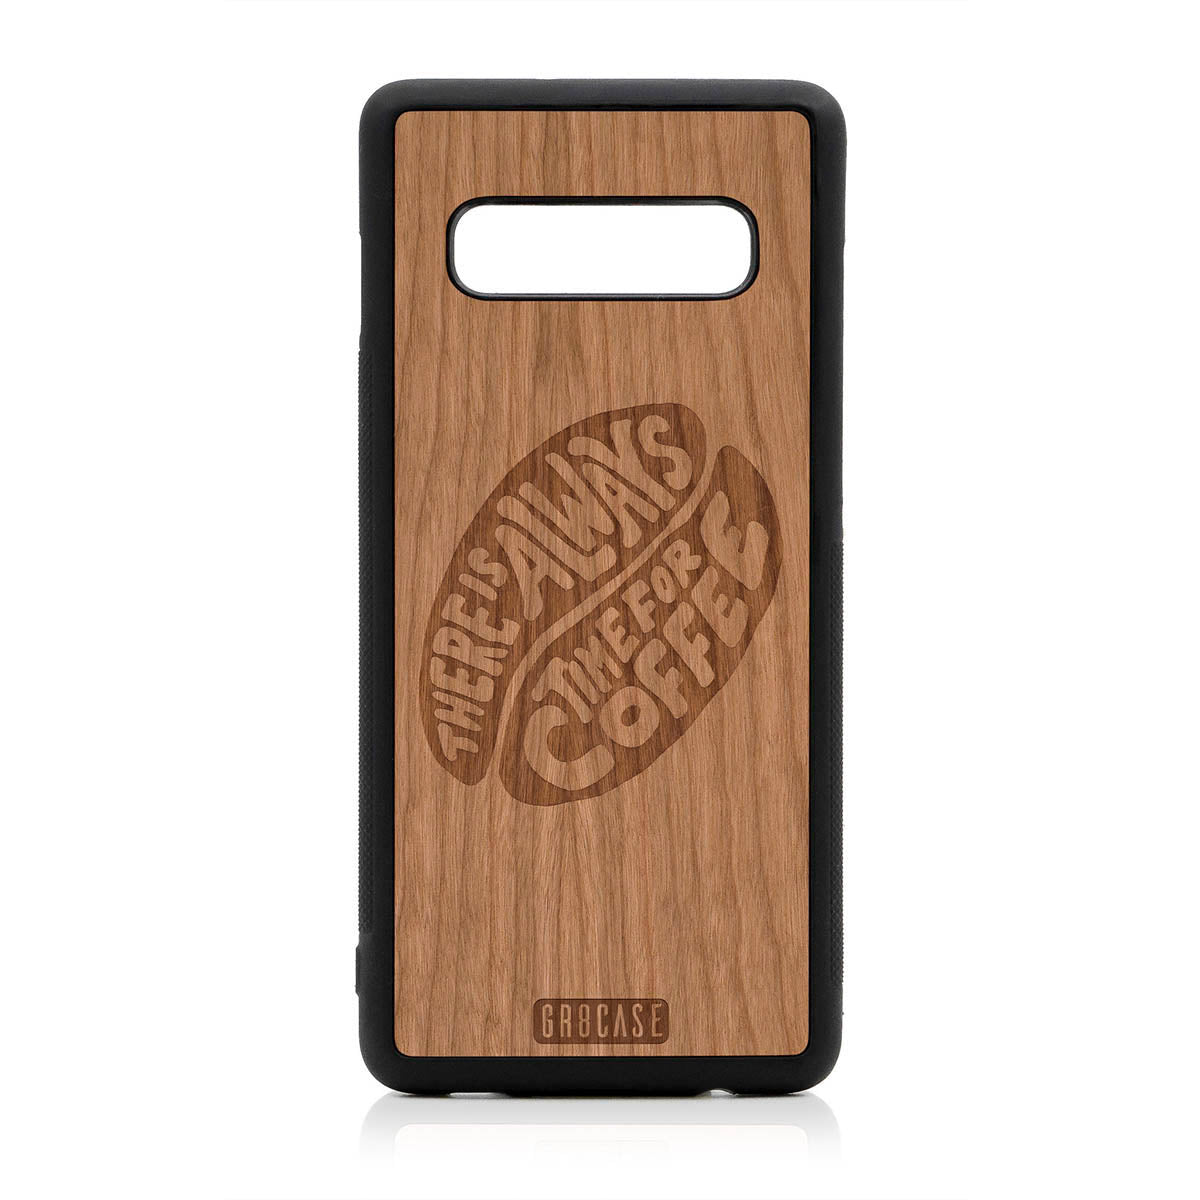 There Is Always Time For Coffee Design Wood Case For Samsung Galaxy S10 Plus